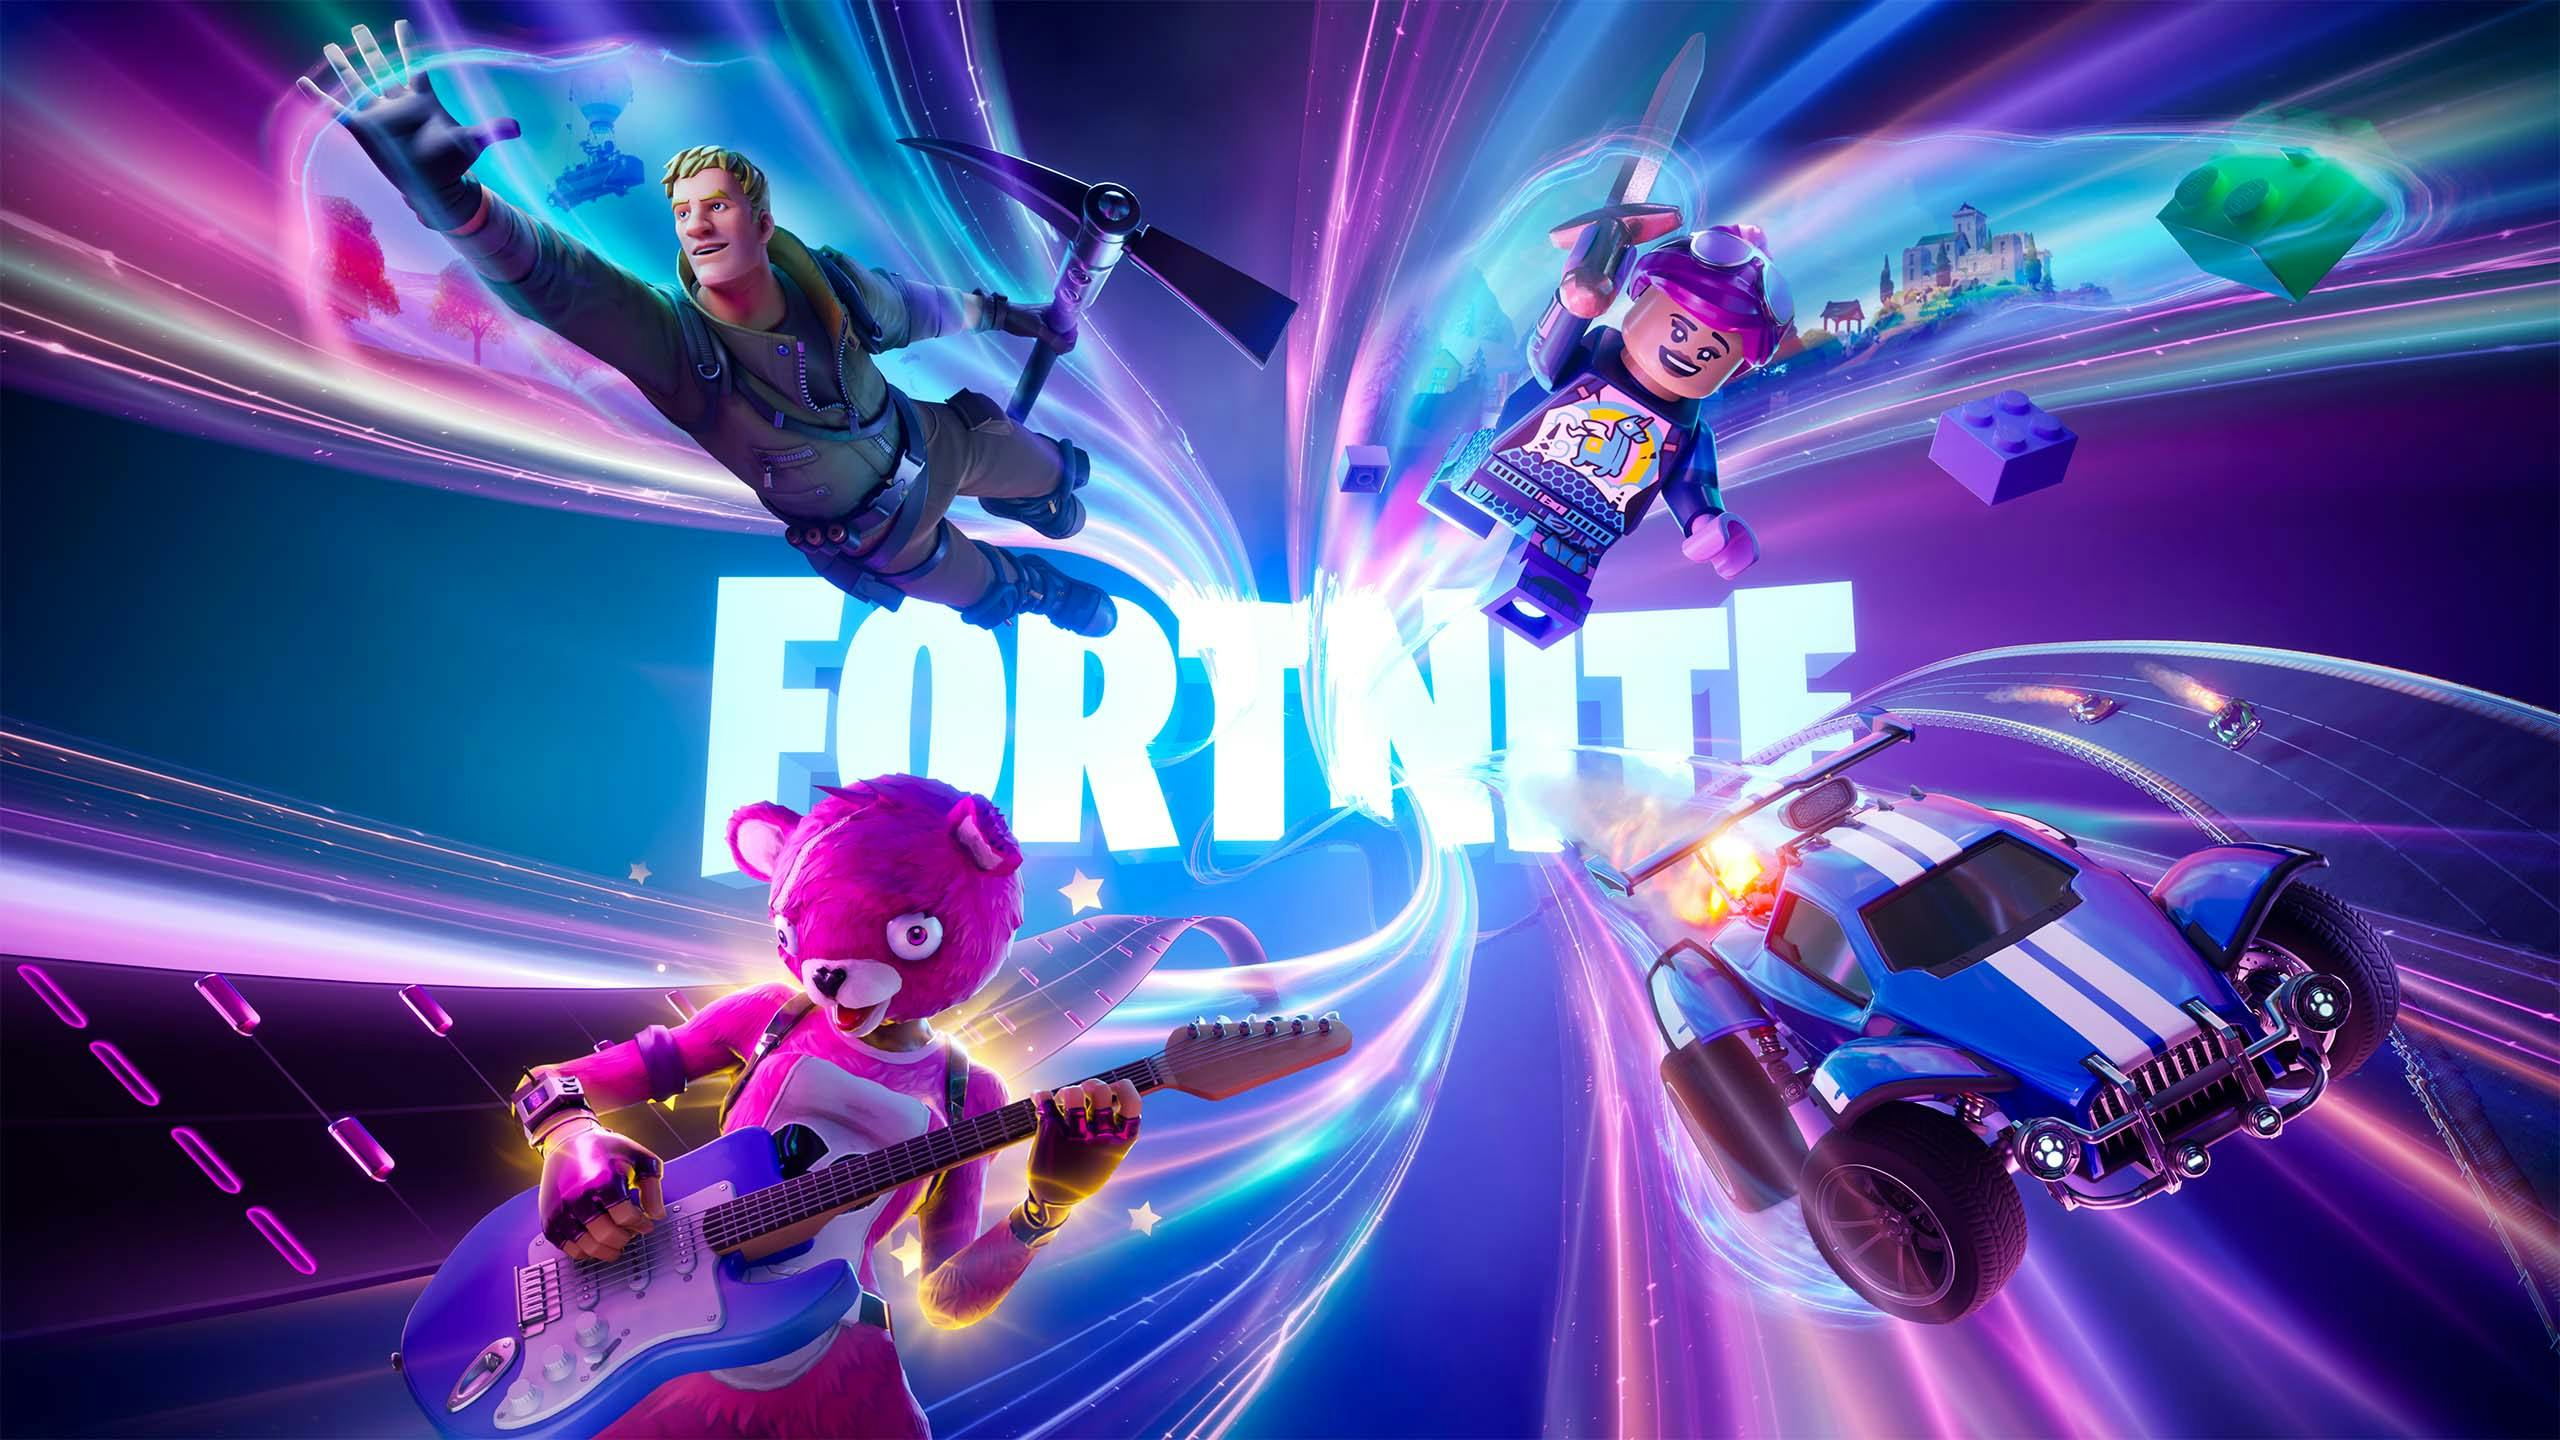 Learn how to get free V-Bucks codes in Fortnite with this guide